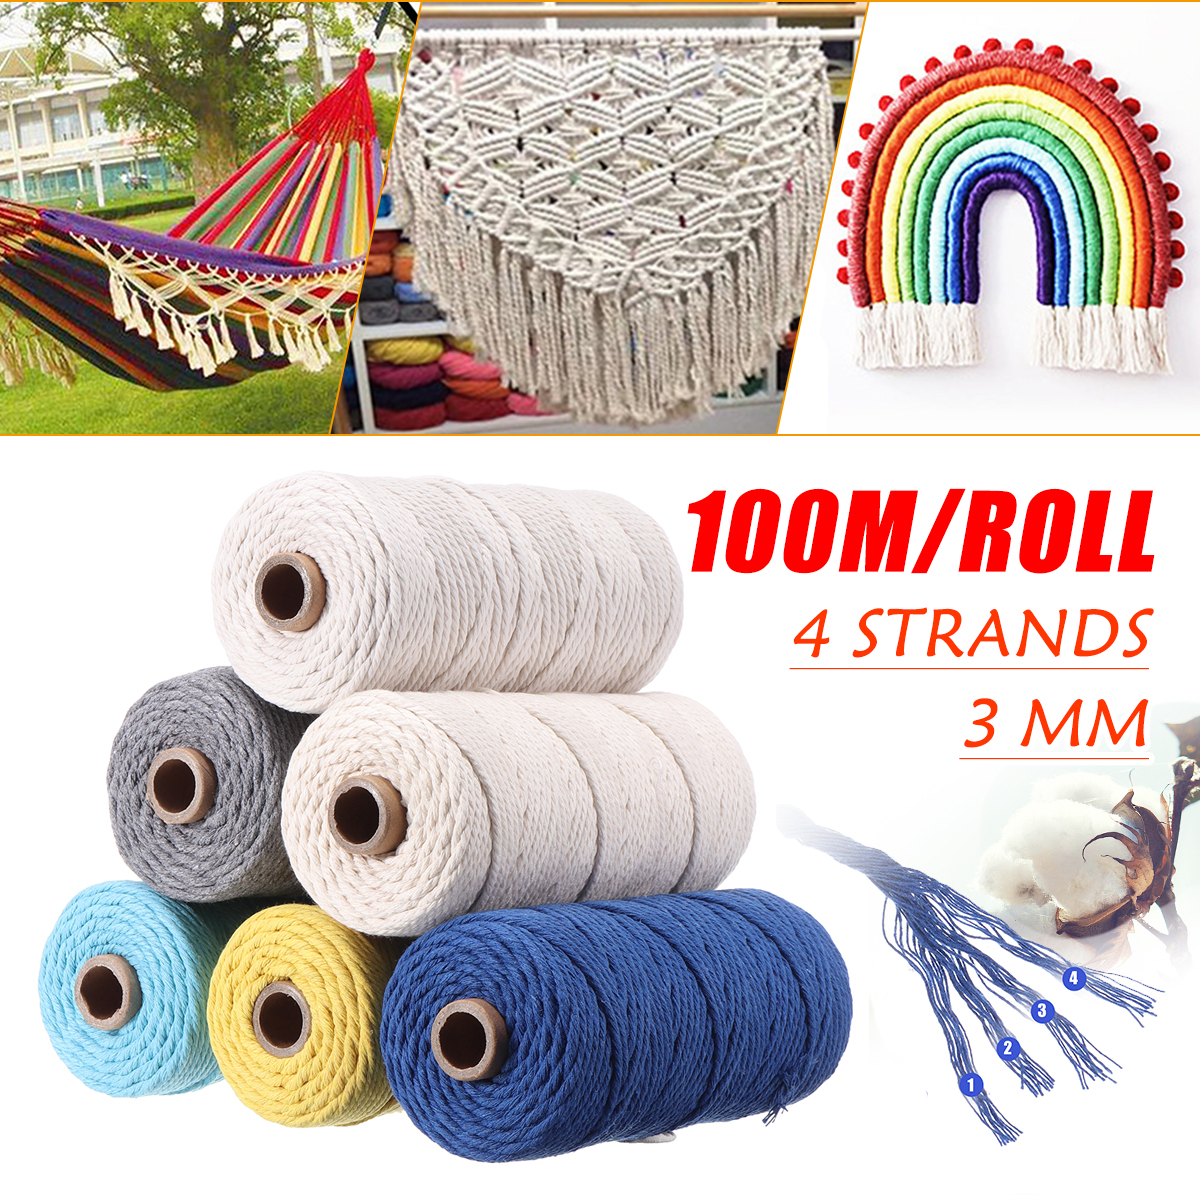 3MM-100MRoll-Cotton-Rope-Thread-Cords-String-Macrame-DIY-Craft-Wire-4-Strands-1709362-1